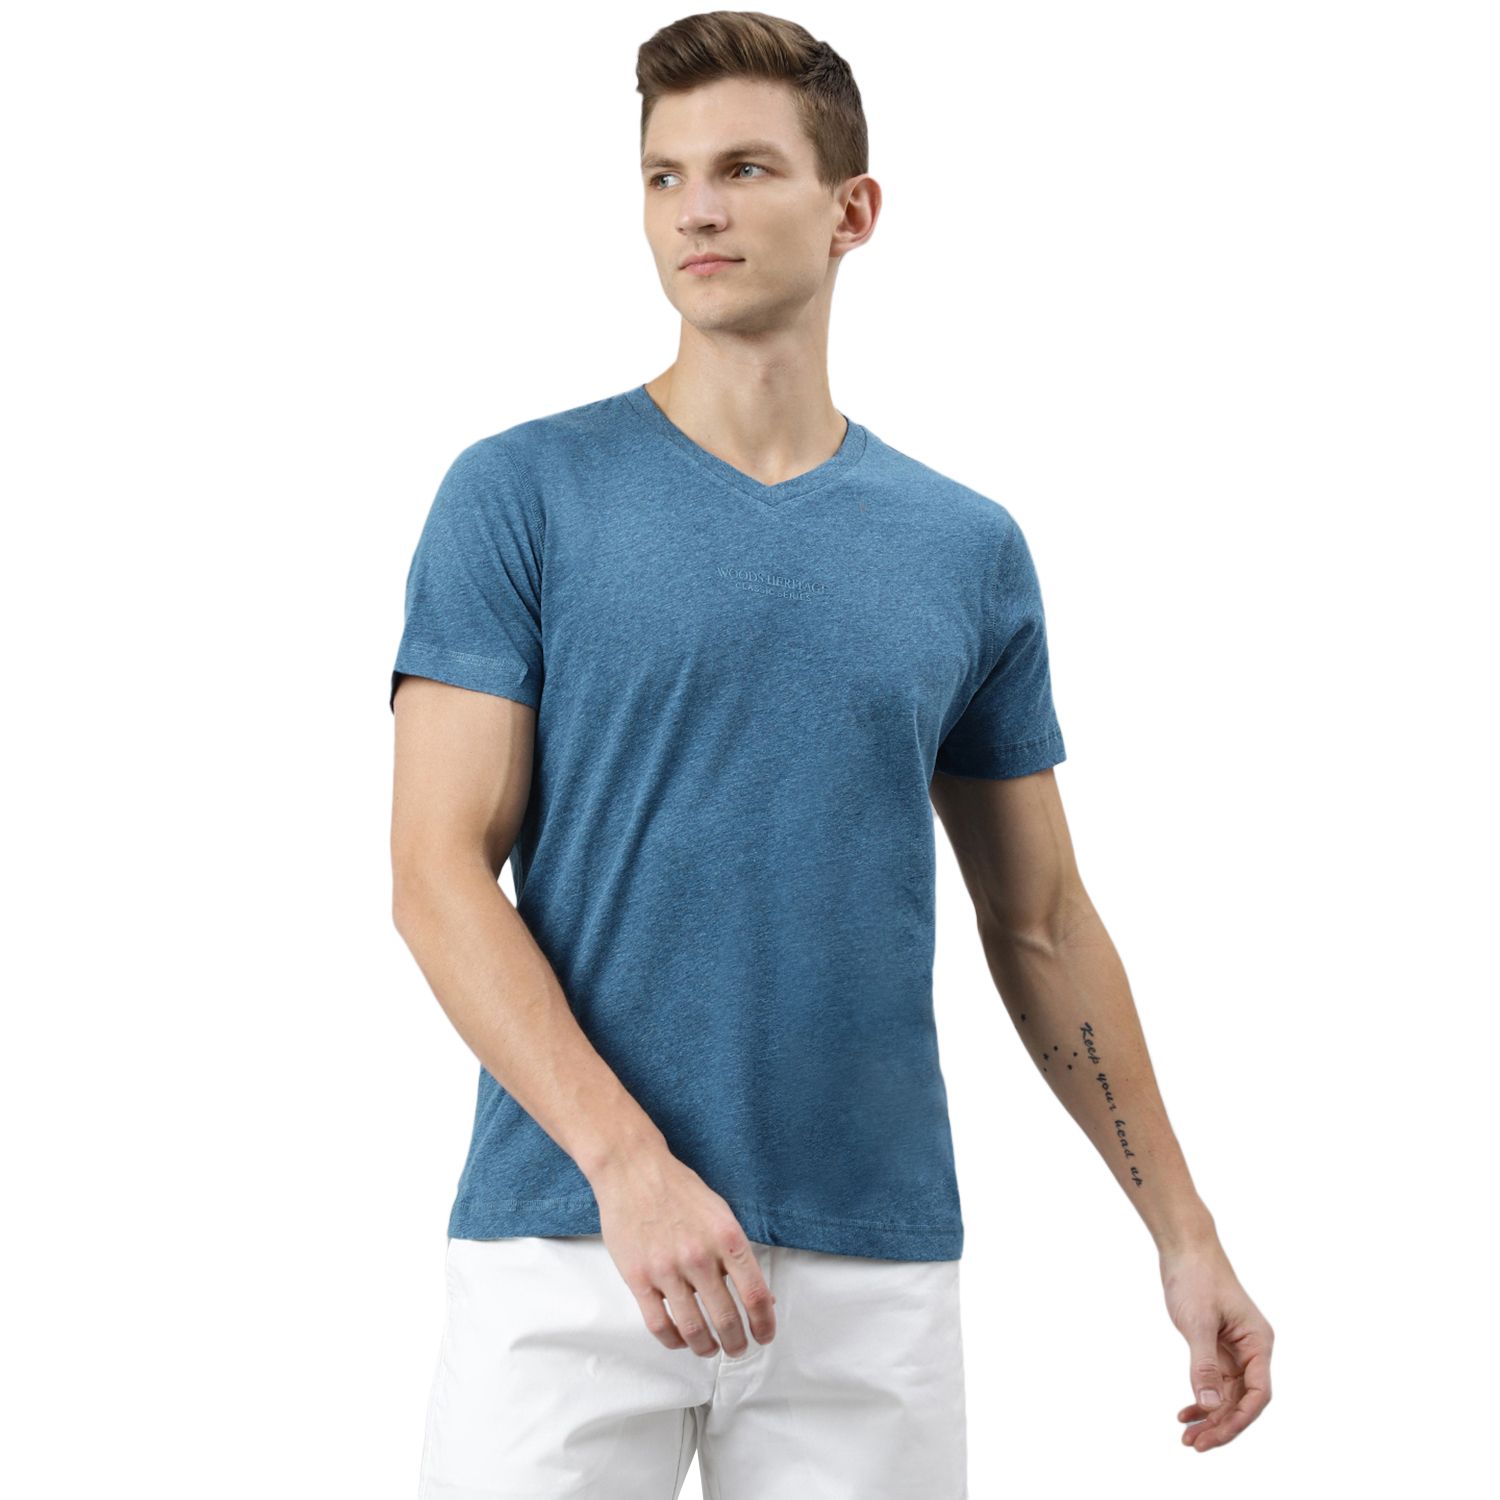 BECLOH Men's Active Quick Dry Crew Neck T Shirts only $4.99